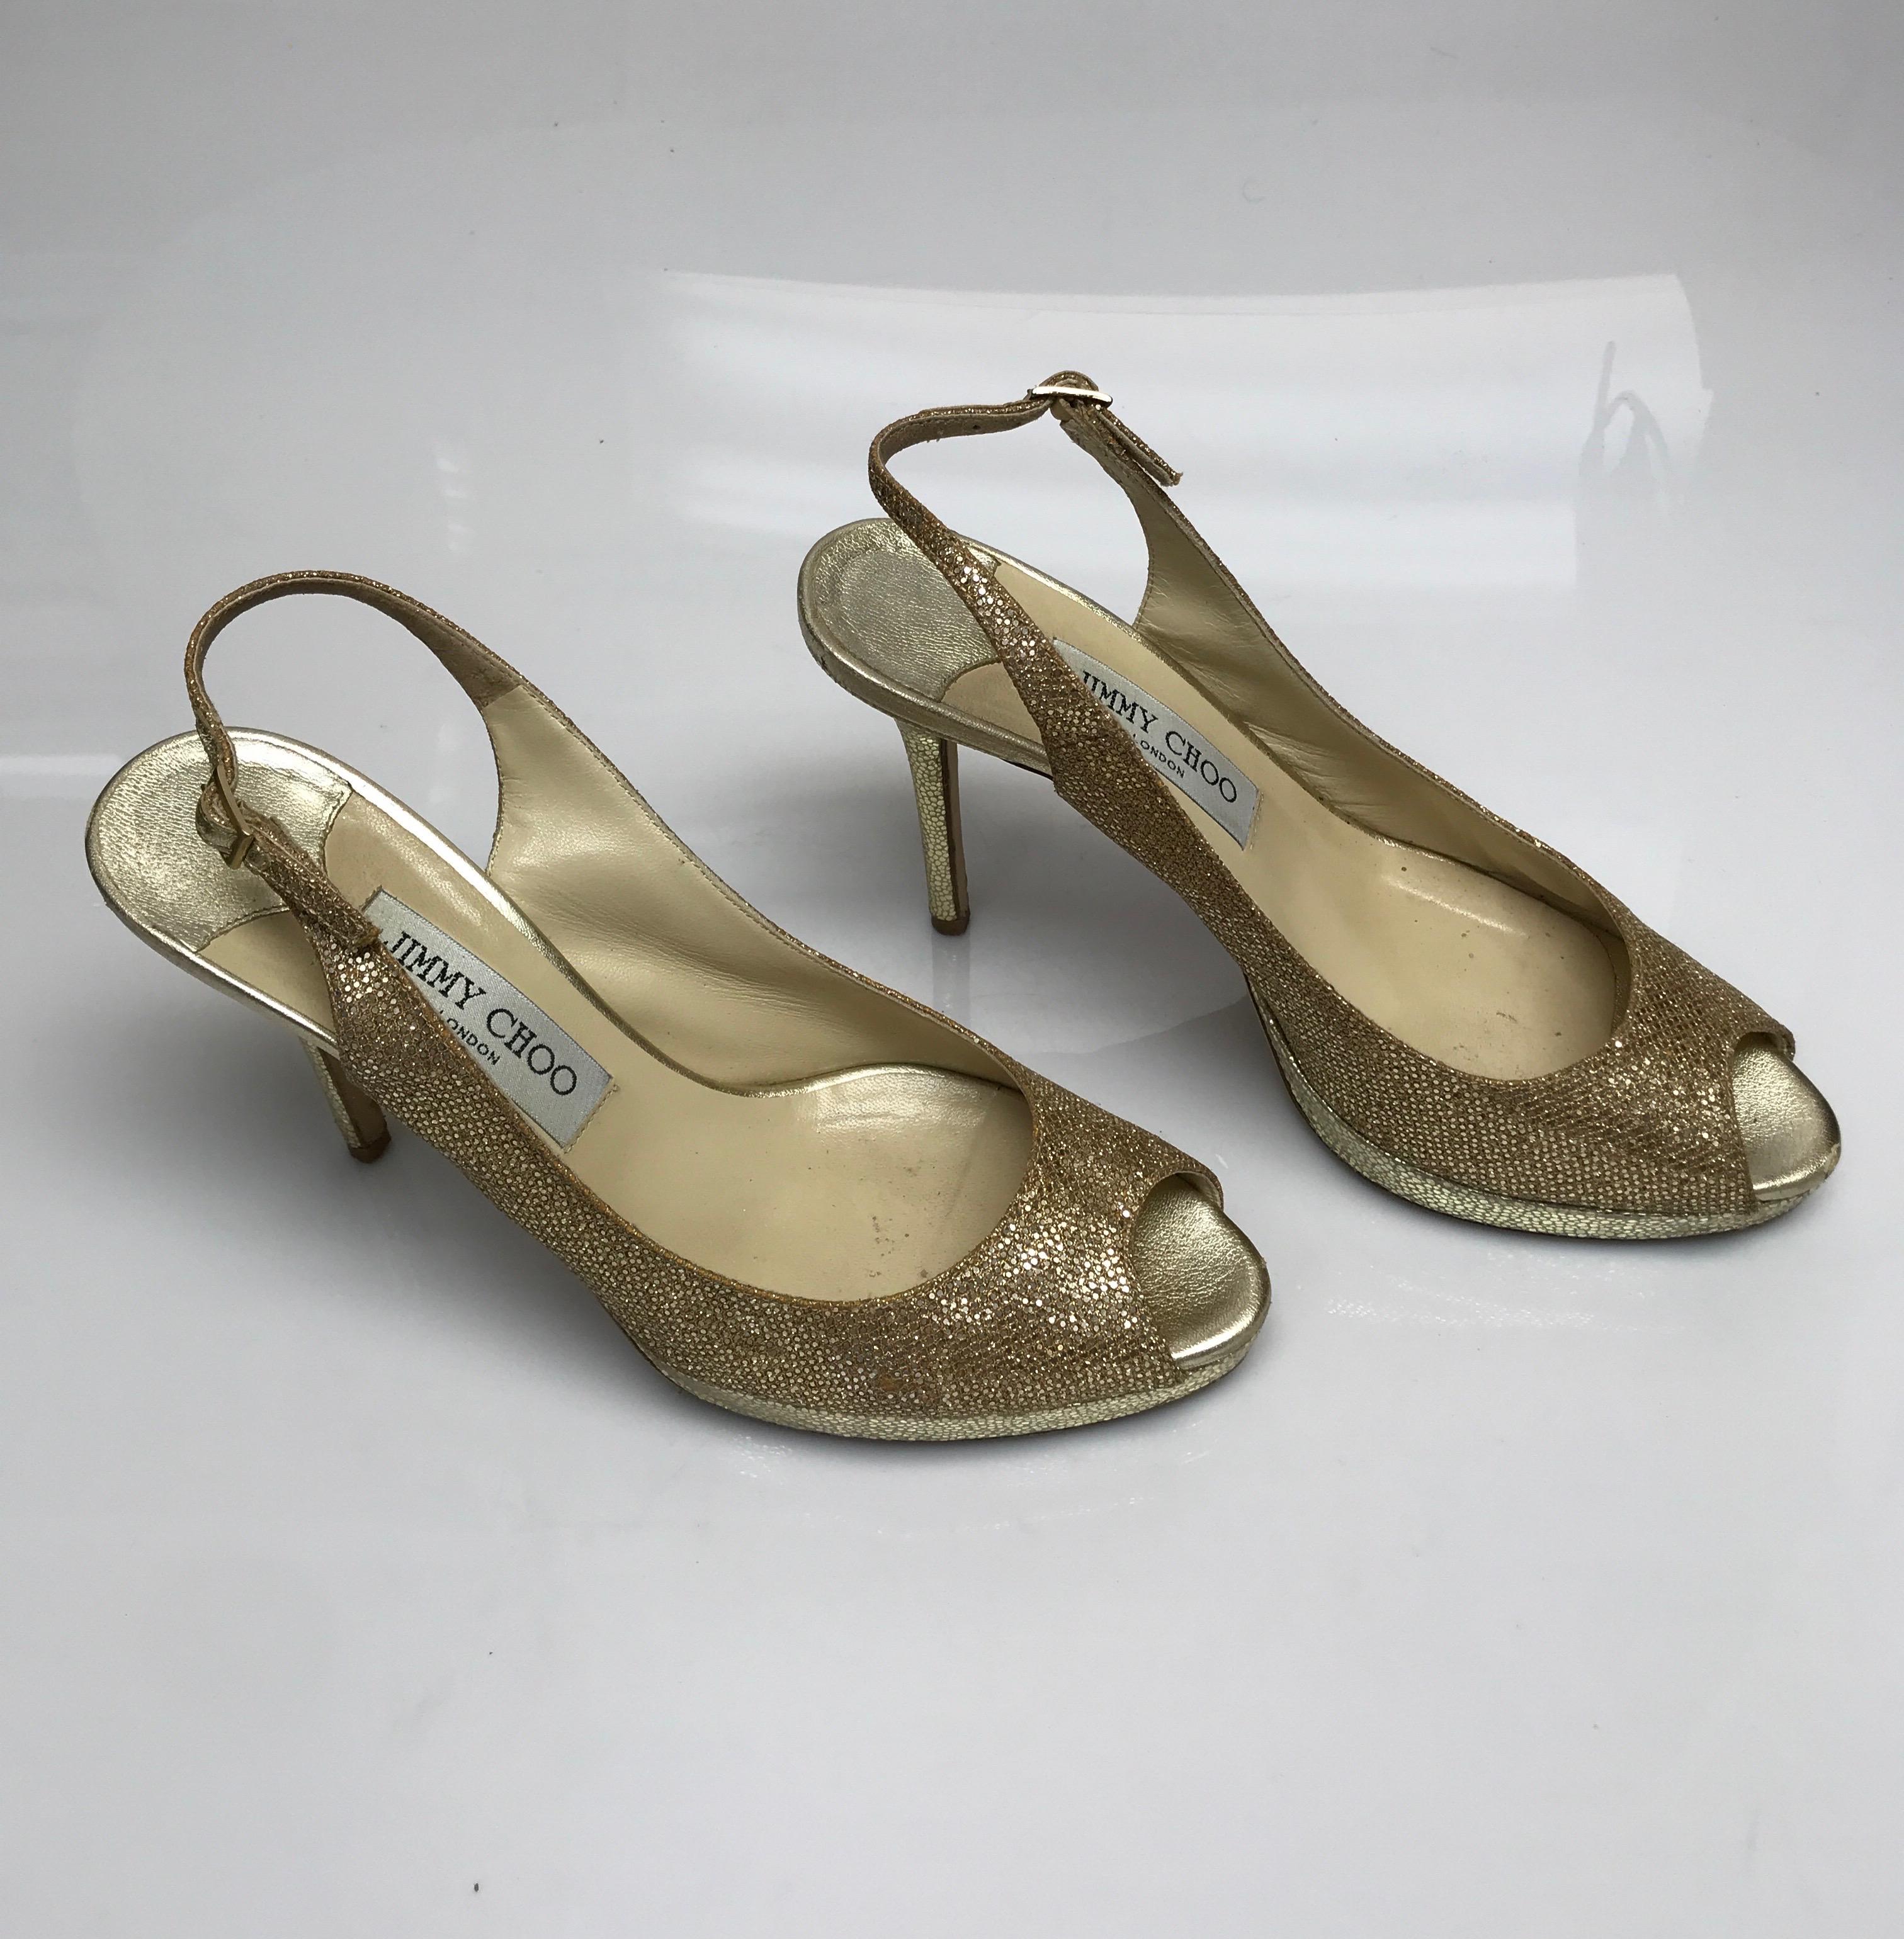 Jimmy Choo Gold Peeptoe Heels-38. These elegant Jimmy Choo heels are in good condition. They show some sign of use to the bottom sole of the shoes and few sequins missing throughout. These shoes are gold textured throughout and have a peeptoe design